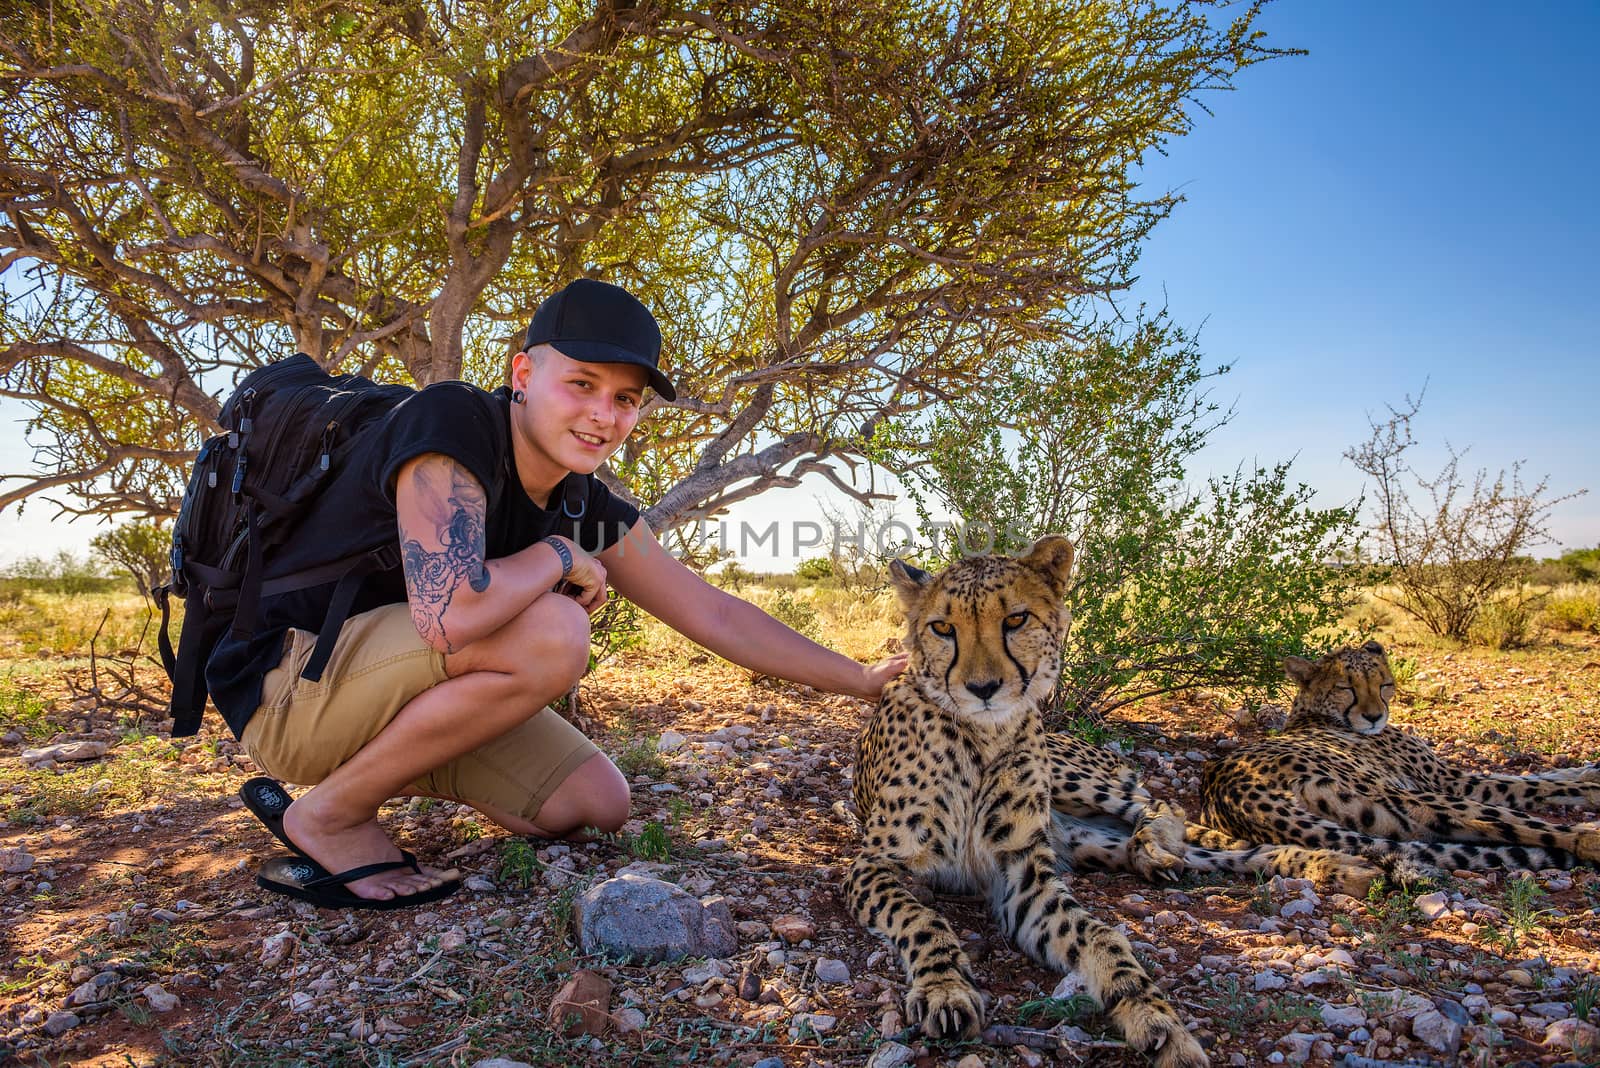 Tourist plays with two cheetahs by nickfox